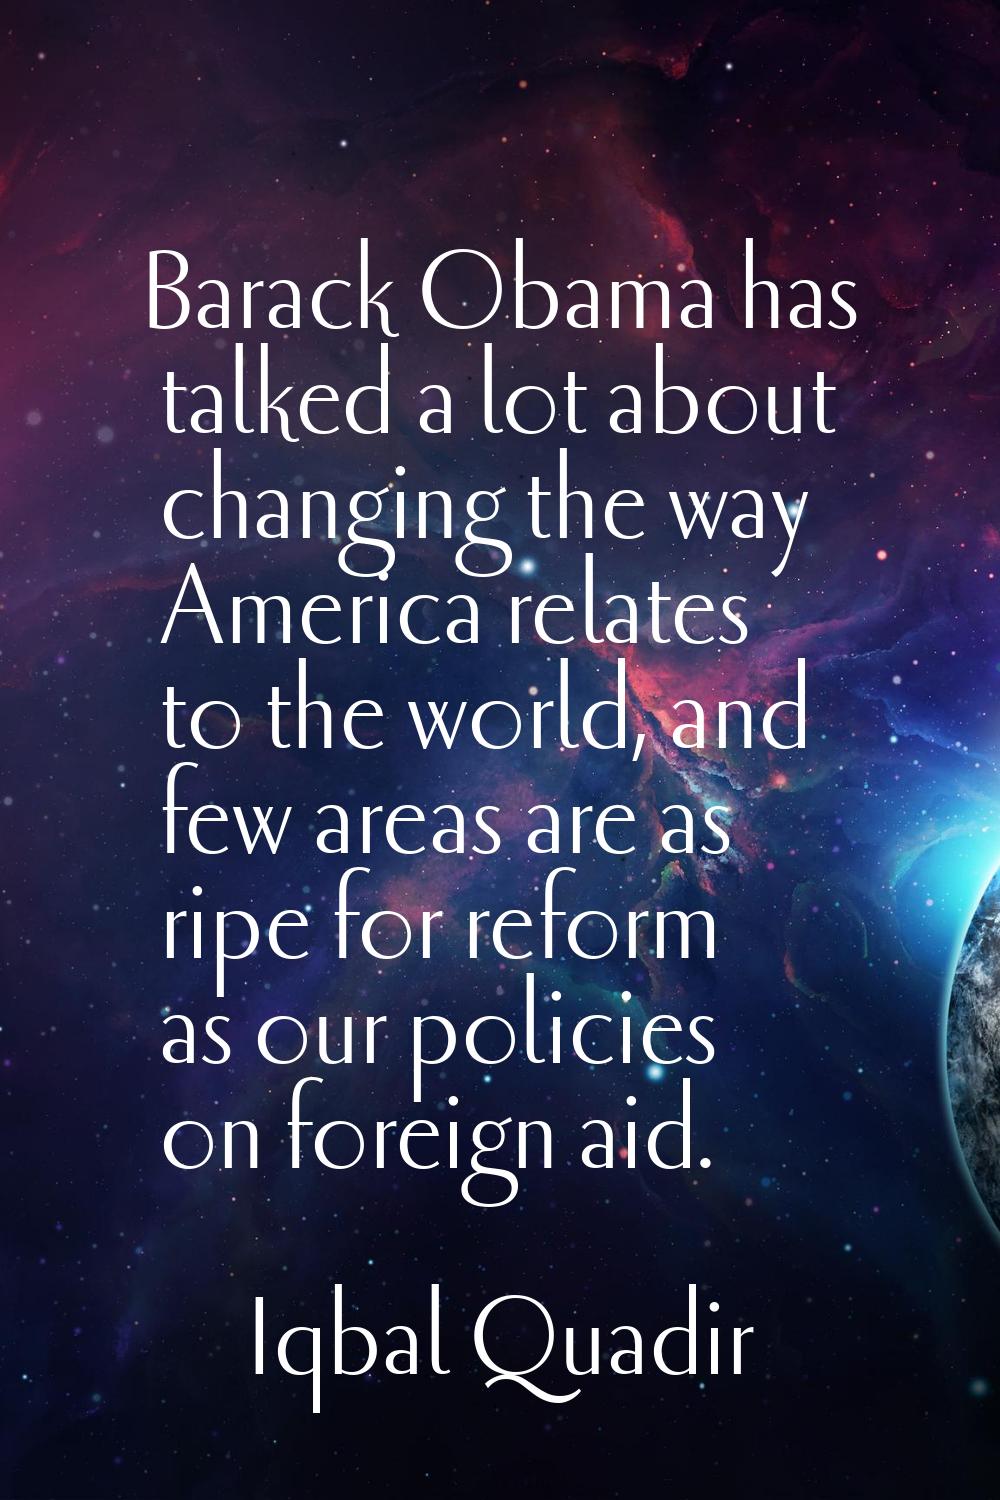 Barack Obama has talked a lot about changing the way America relates to the world, and few areas ar